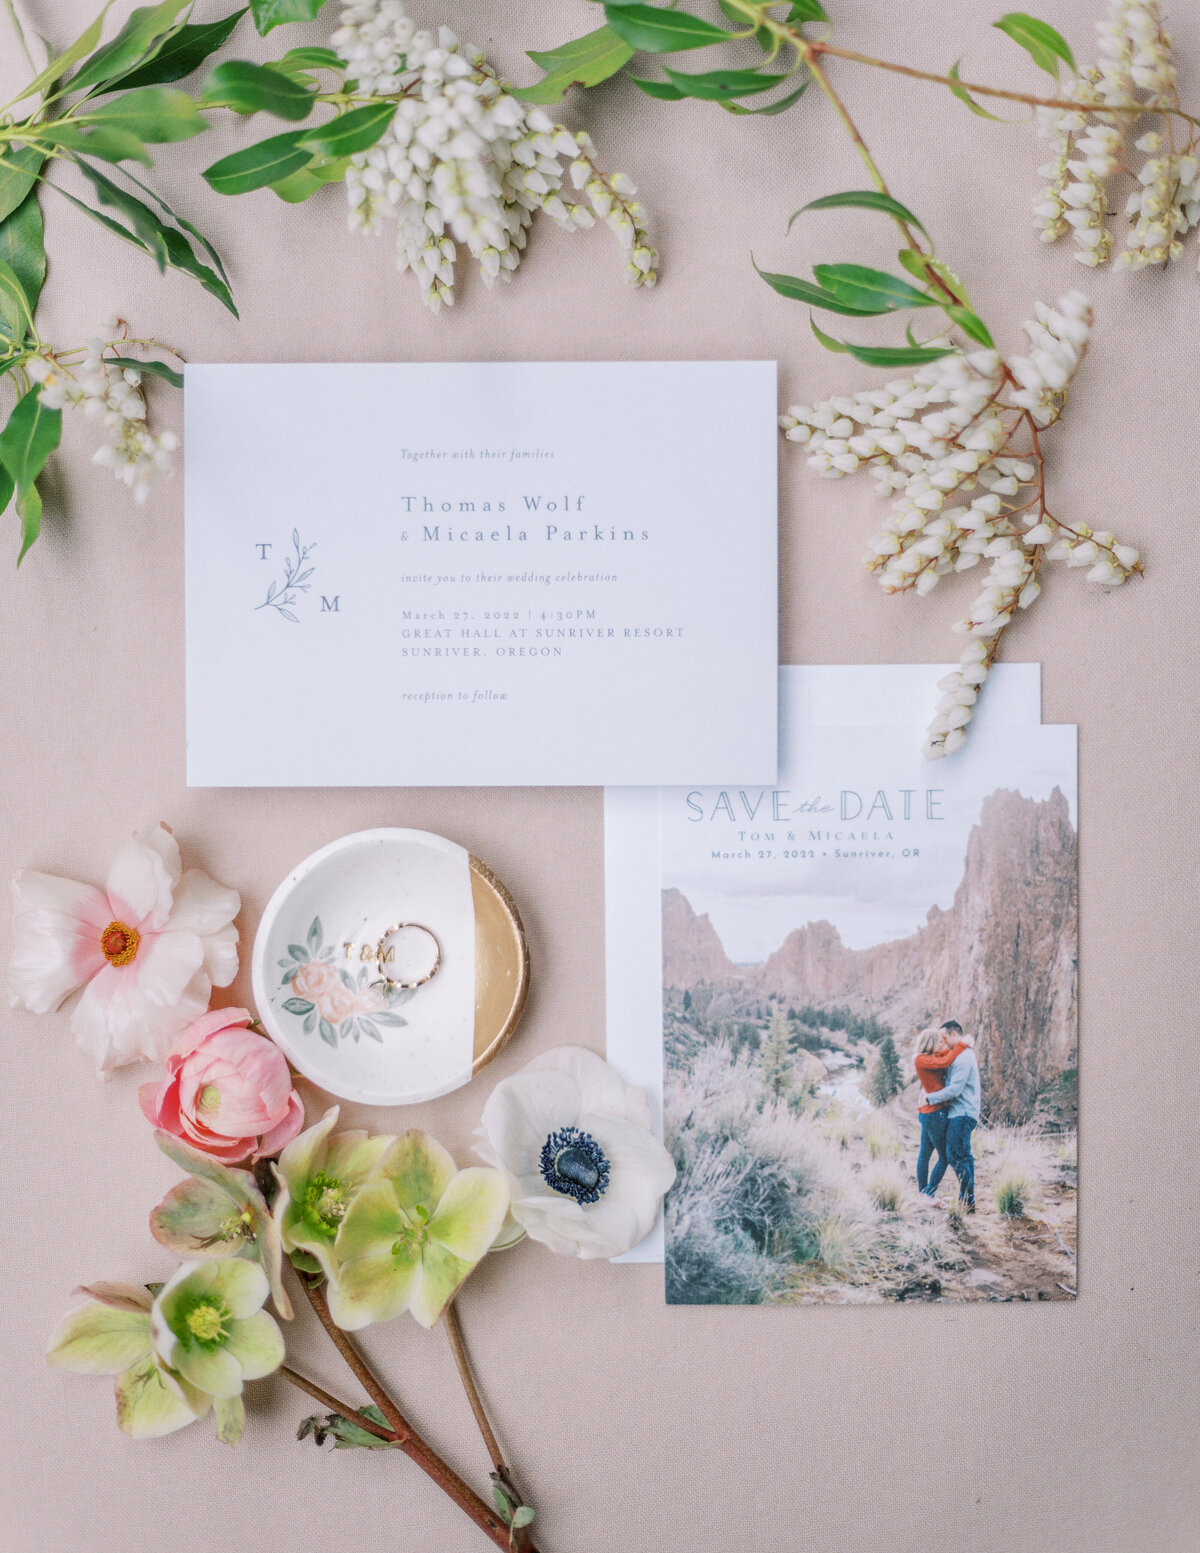 Romantic wedding flat lay with paper goods